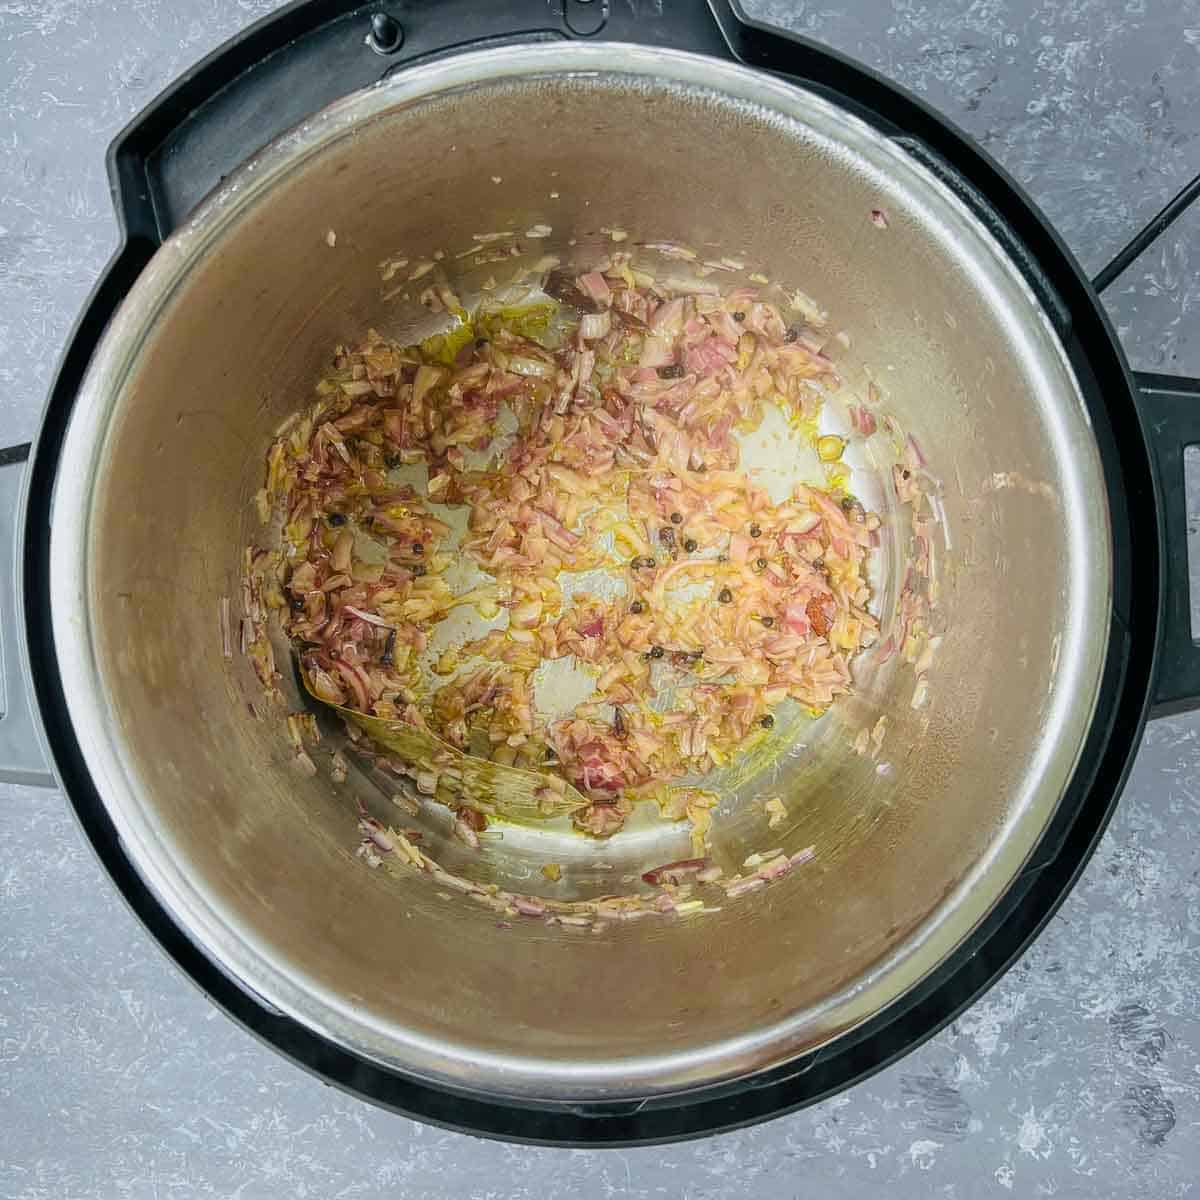 Saute whole spices and onions in the Instant Pot.